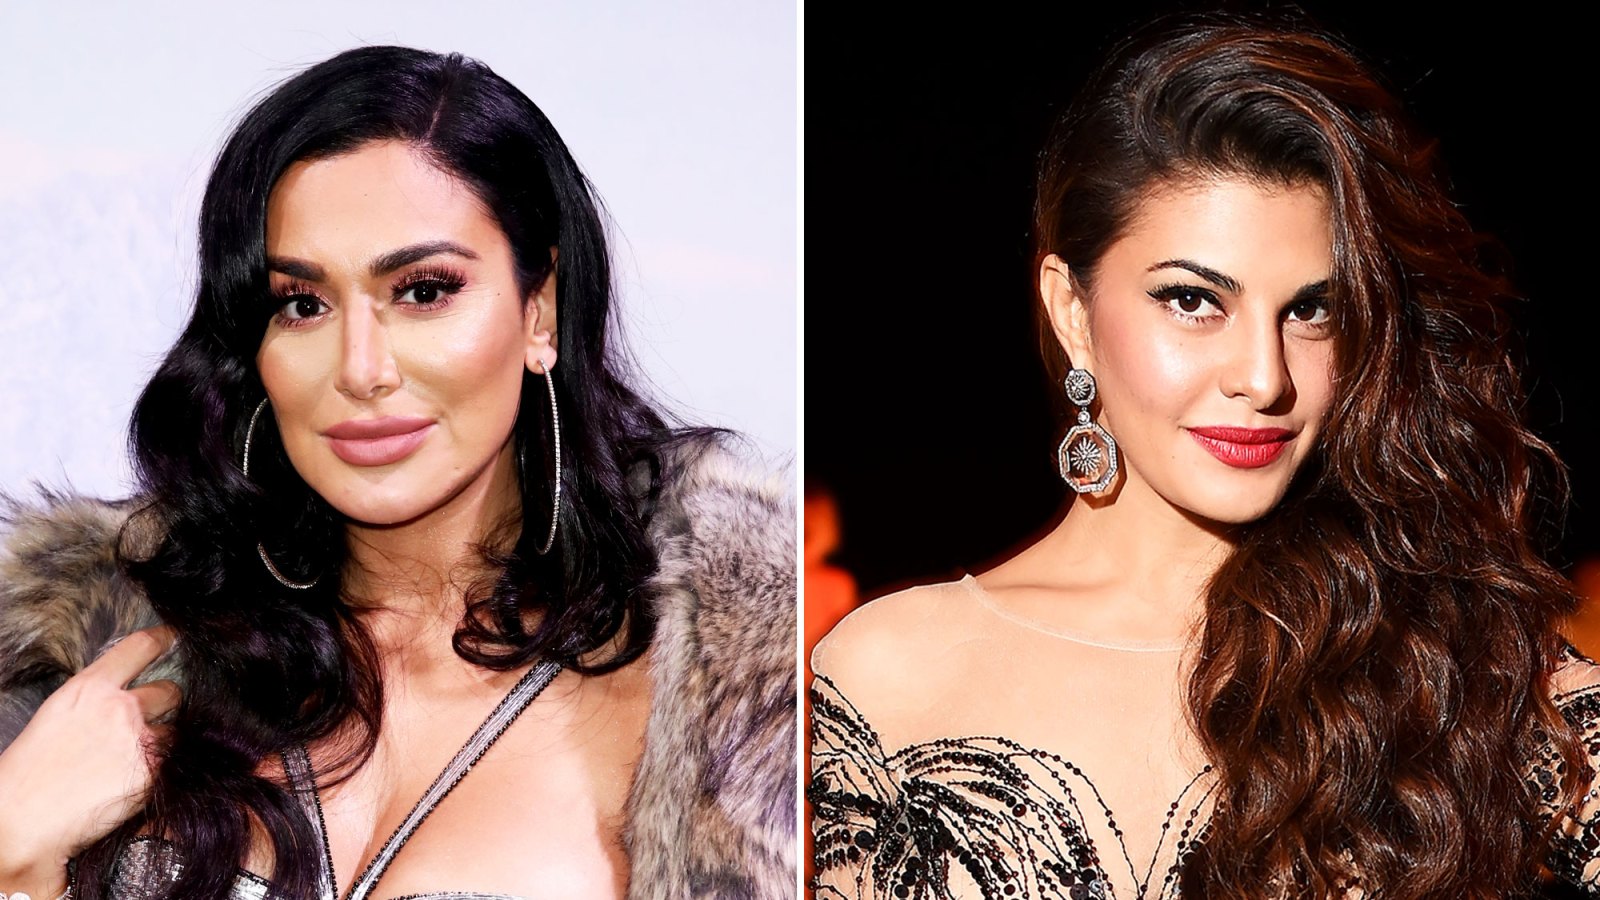 Jacquline Naked Bollywood Actress - Huda Beauty x Bollywood Star Jacqueline Fernandez Collab: Details